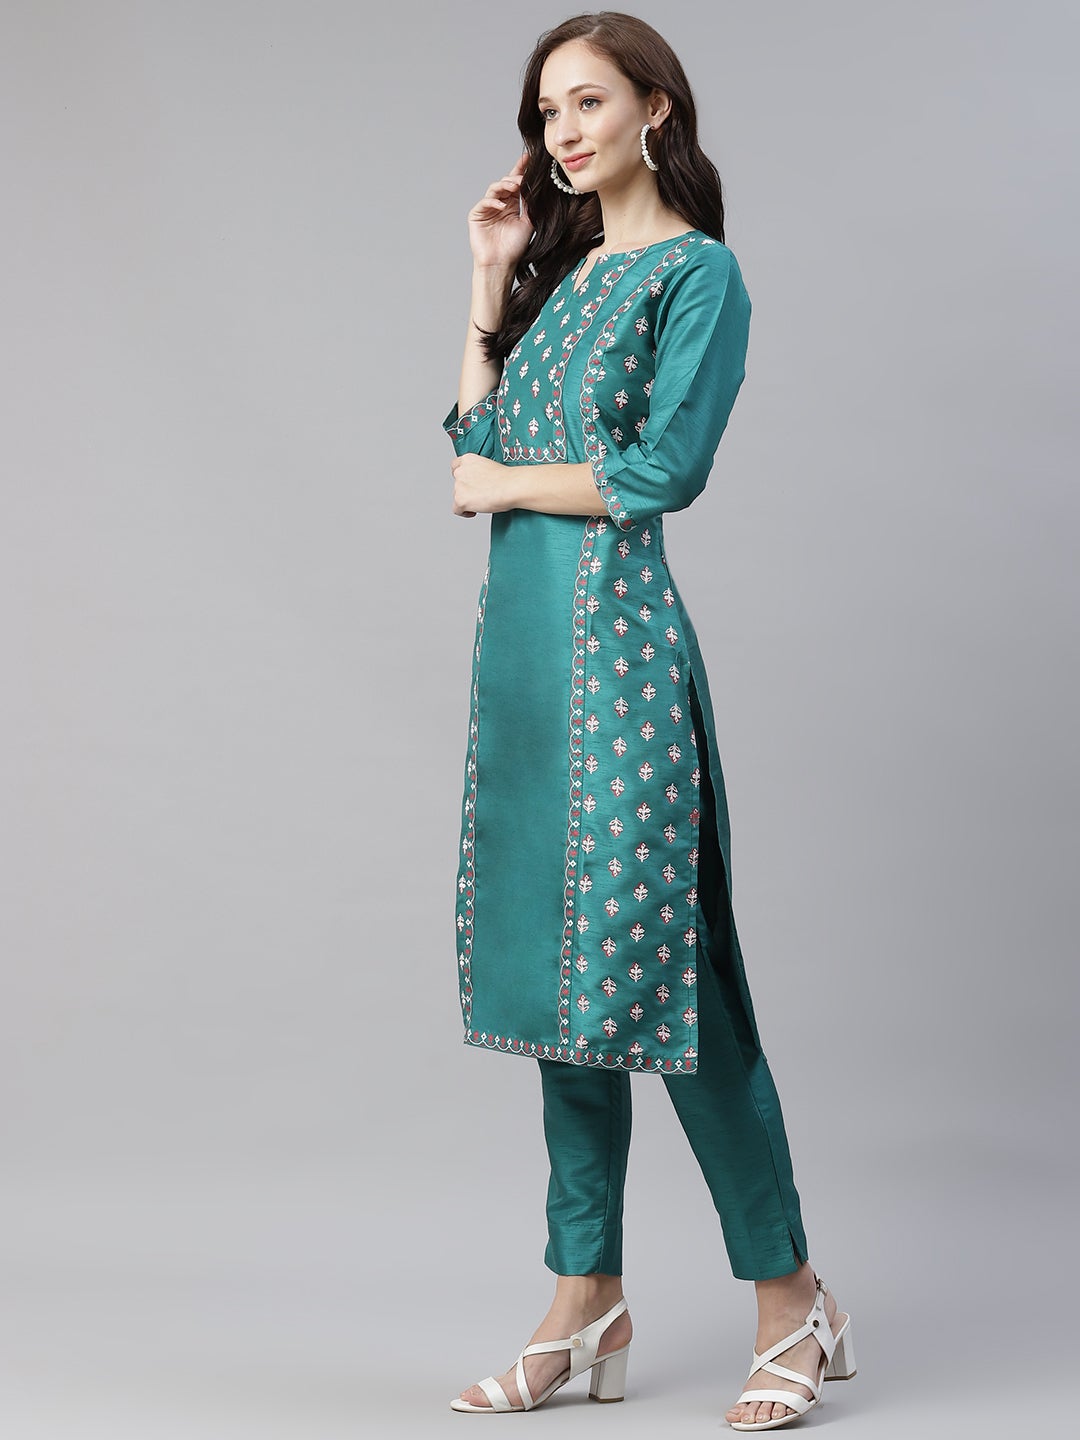 Mindhal Women's Green Color Foil Printed Straight Kurta And Pant Set